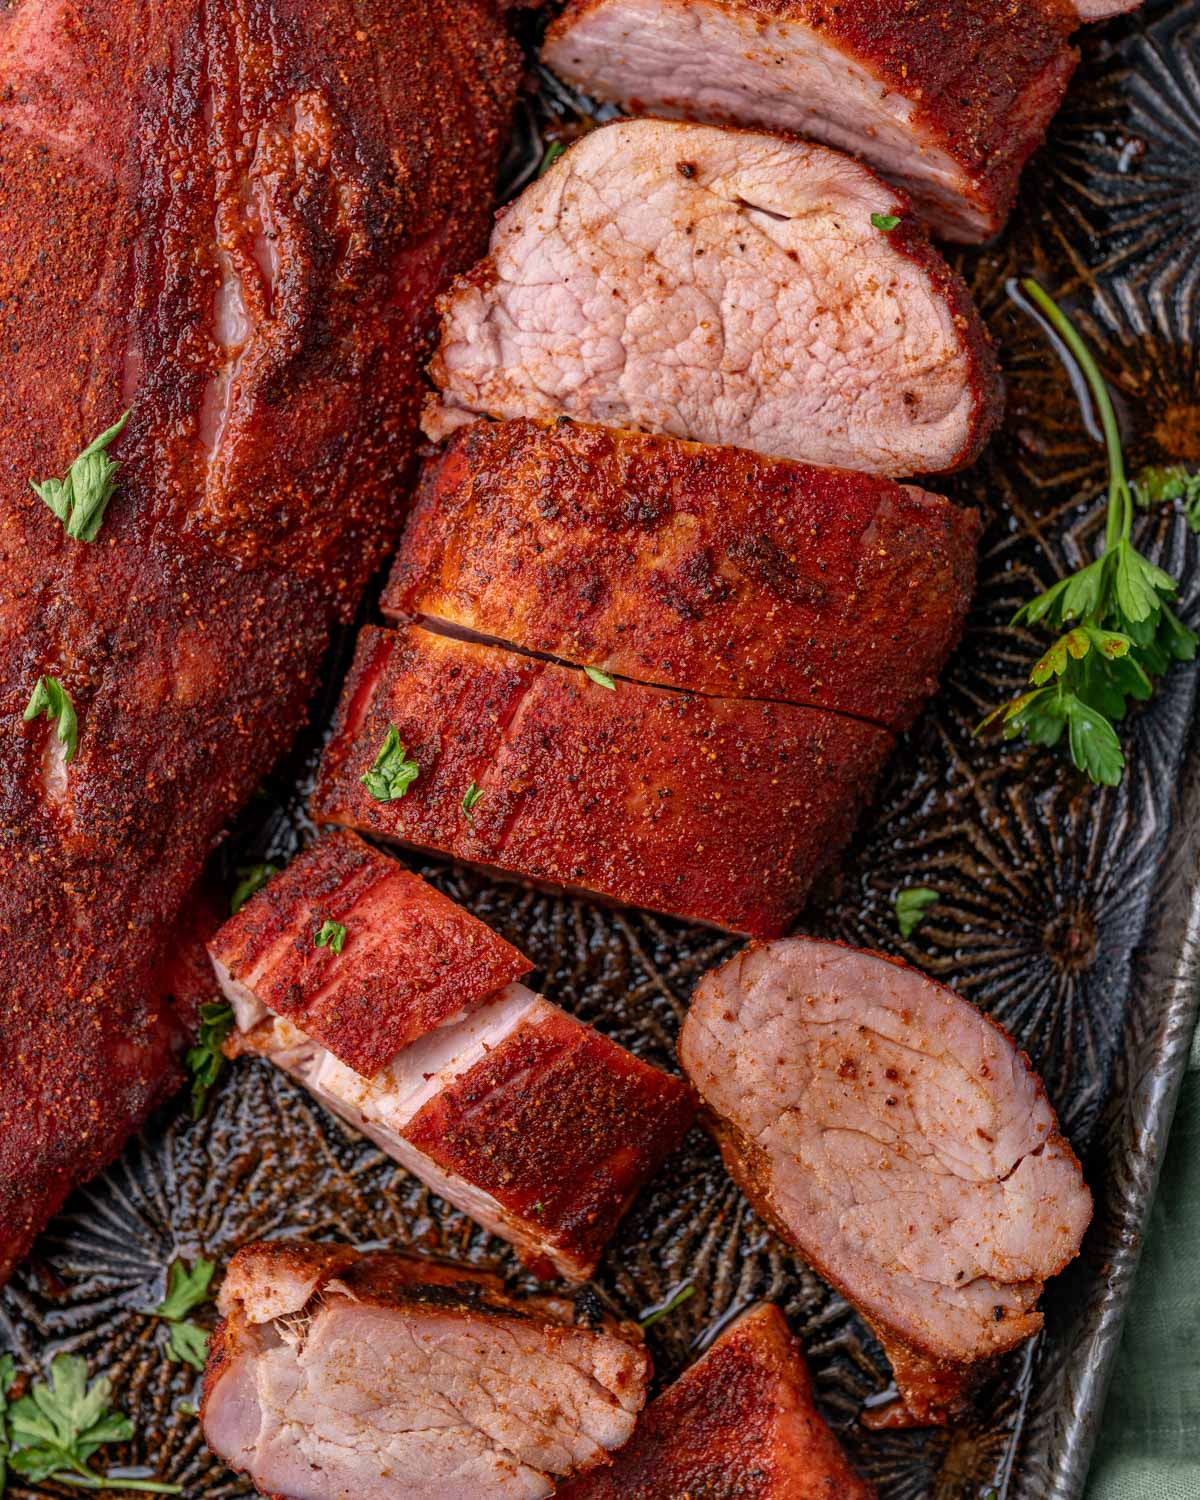 slices of smoked pork tenderloin on a baking sheet with fresh parsley